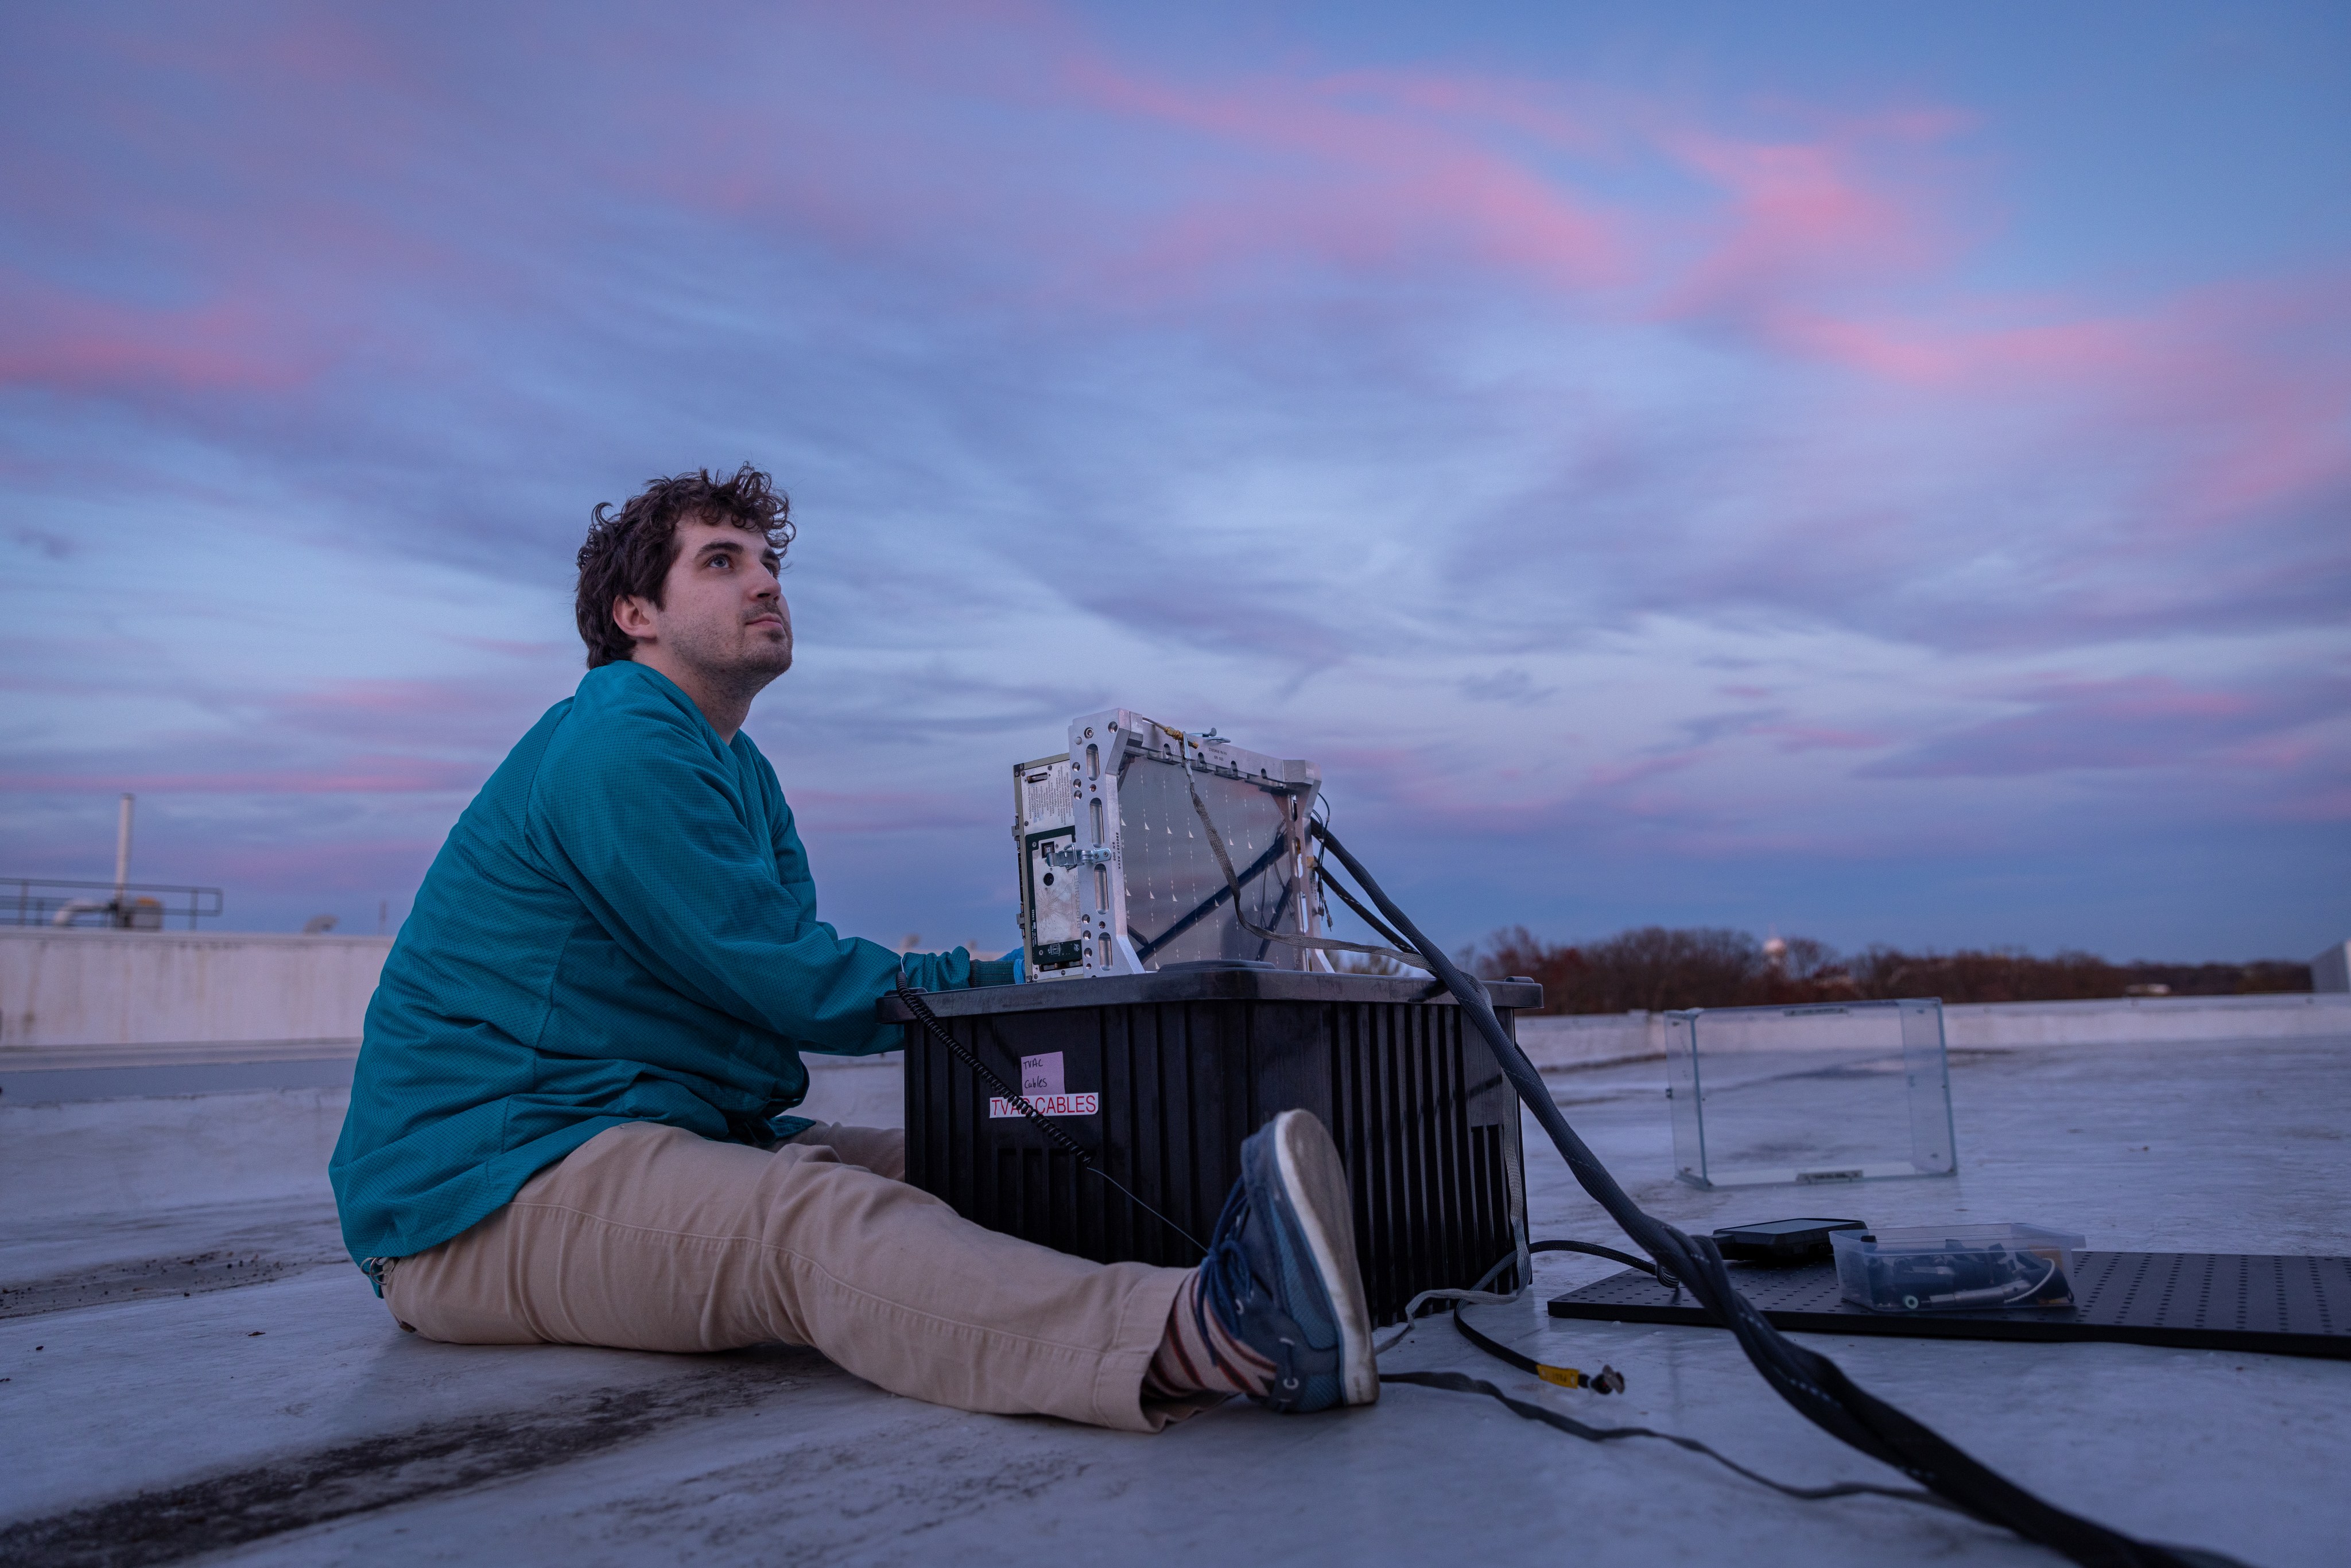 This photograph shows a man sitting next to a spacecraft on a rooftop.